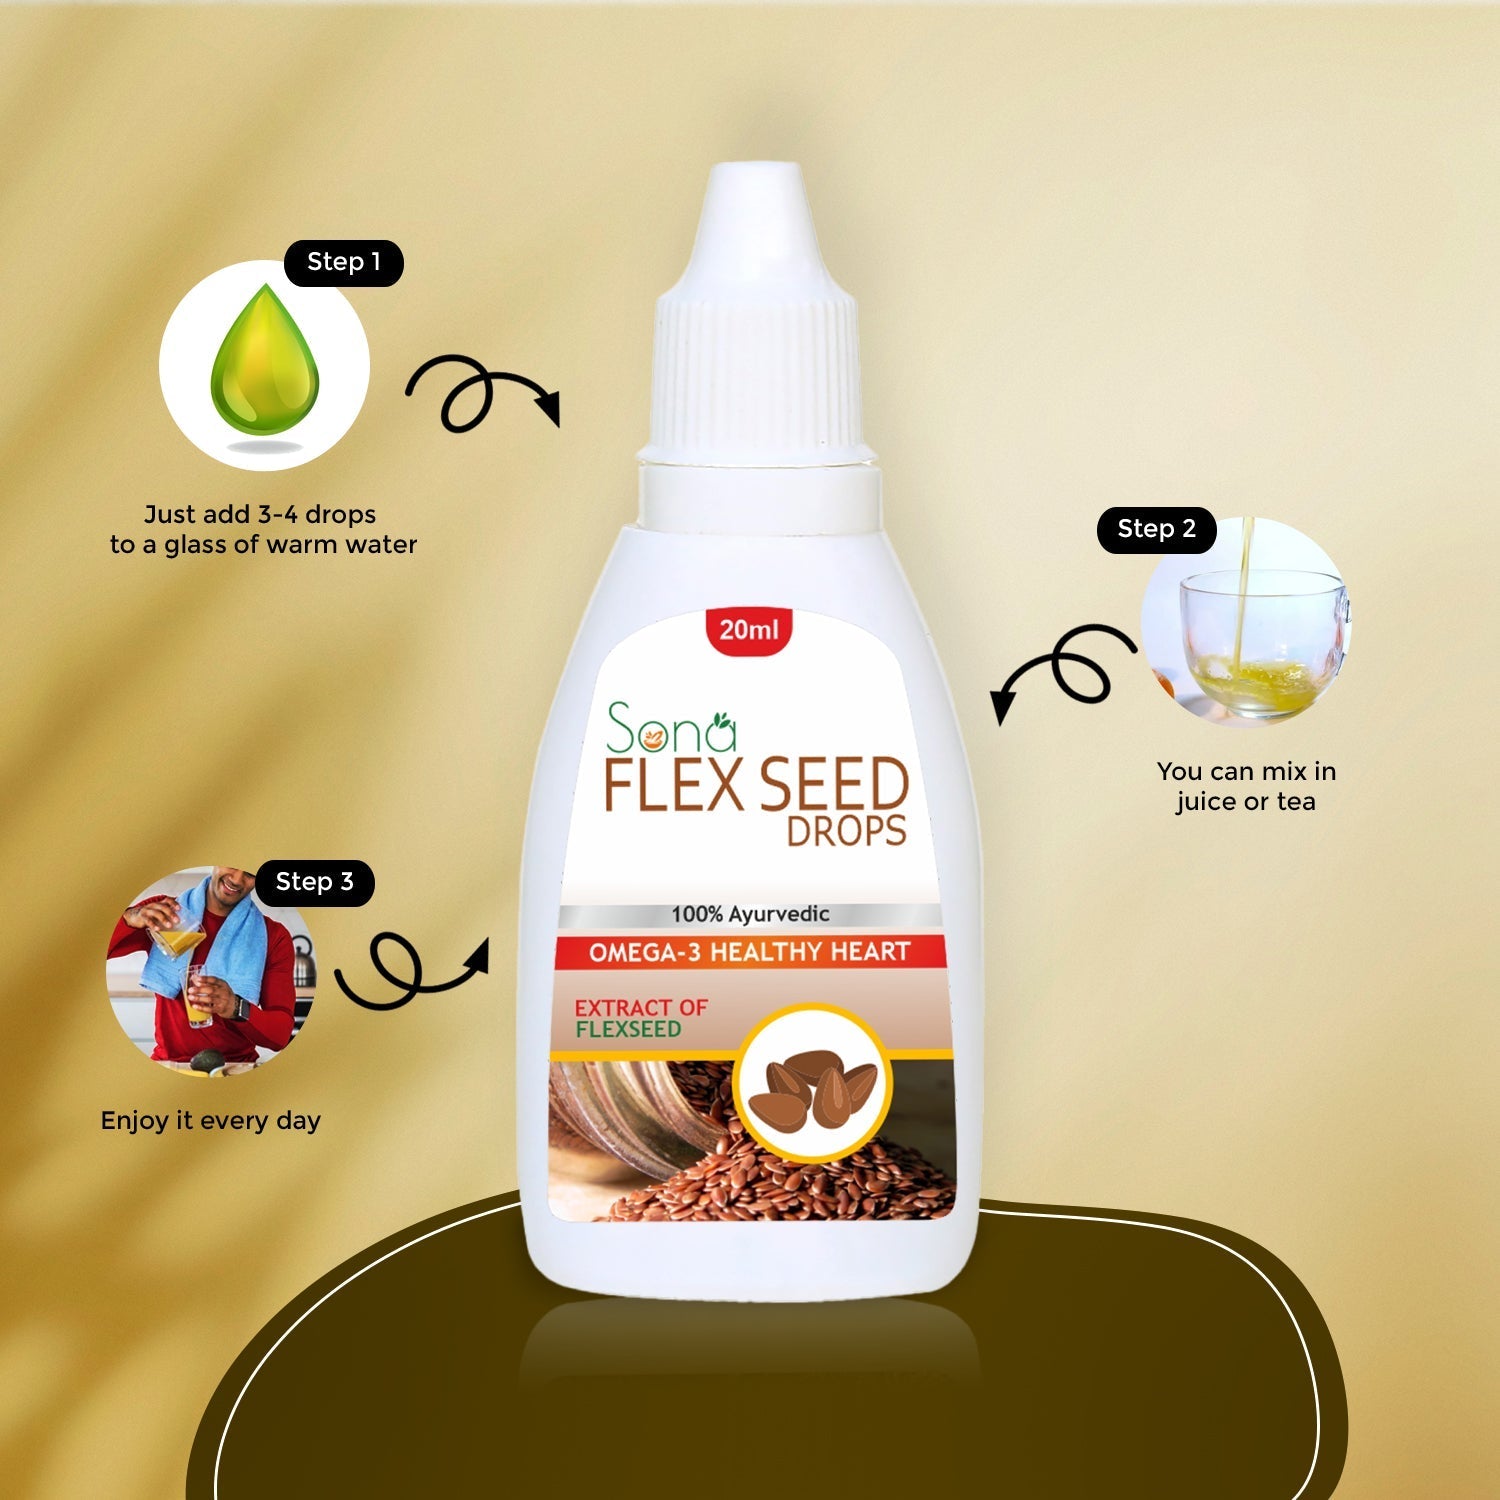 Sona Flex Seed  Drop Omega-3 For Healthy heart (Pack of 3)